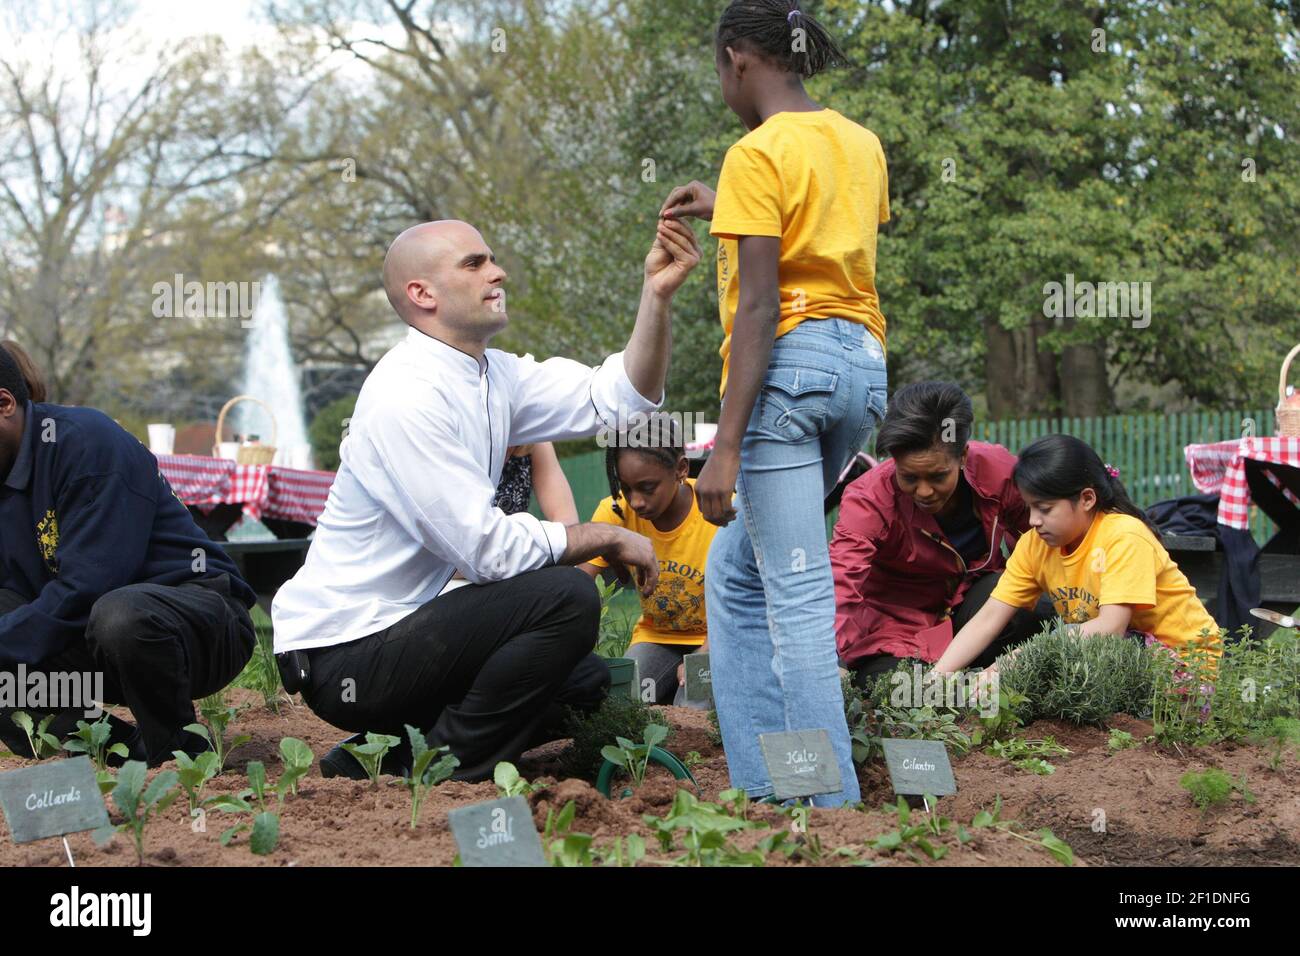 Sam Kass, assistant White House chef, shows Bancroft Elementary School students how to plant seedlings and small plants for the White House Kitchen Garden on April 9, 2009 in Washington, D.C. At the White House, Sam Kass' work has ranged from helping establish a vegetable and herb garden to brewing up a few beers. (Photo by Nancy Stone/ Chicago Tribune/TNS/Sipa USA) Stock Photo